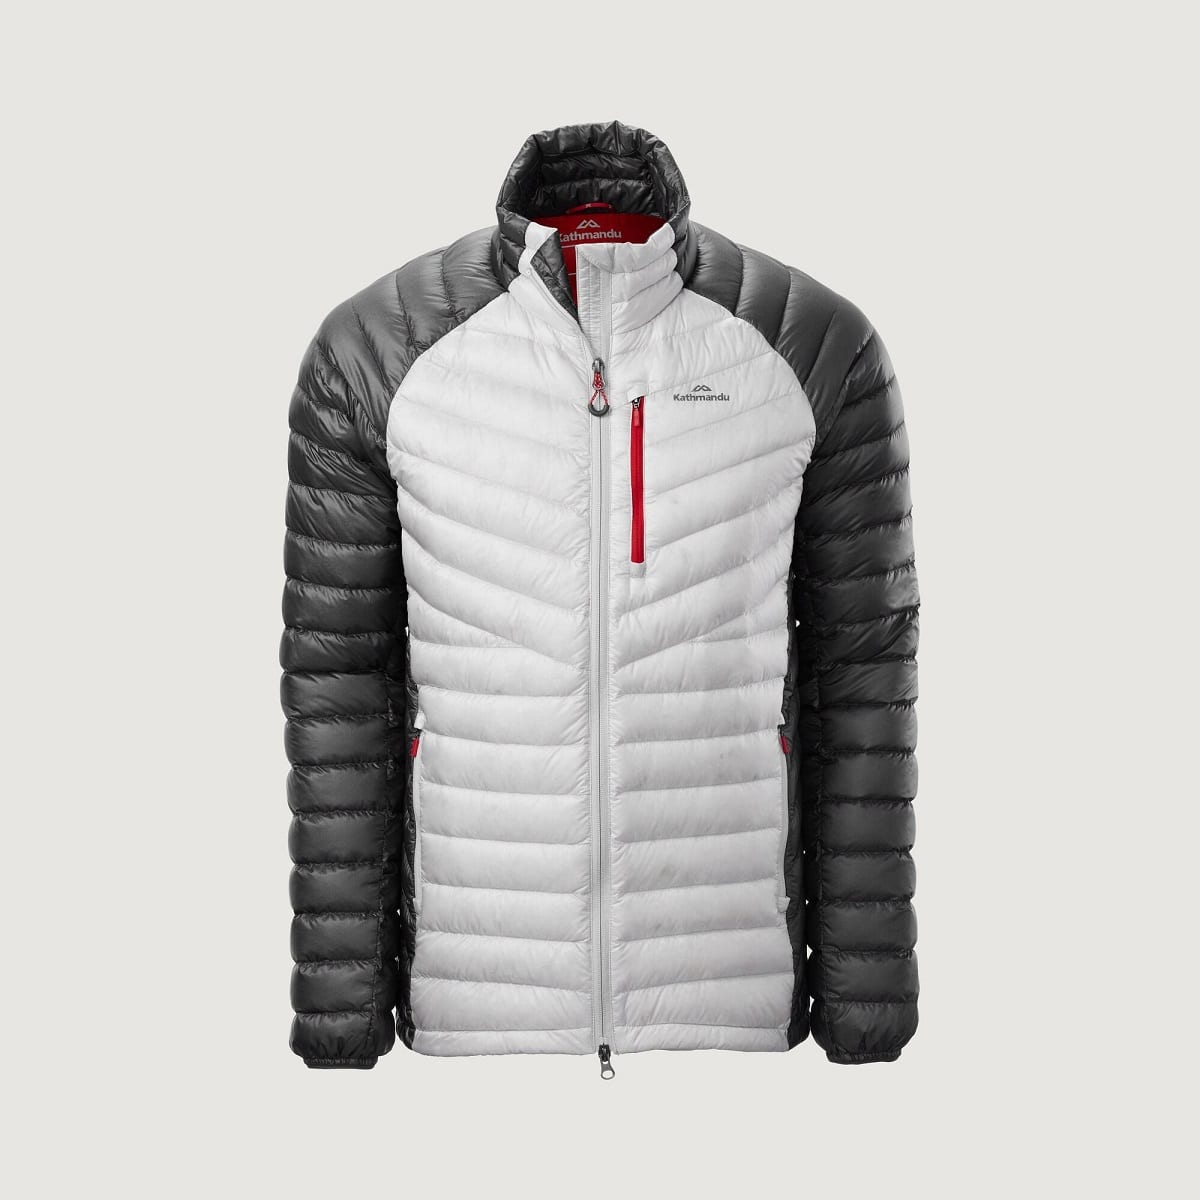 Kathmandu is a great brand to look for if you're in the market for an affordable men's puffer jacket.